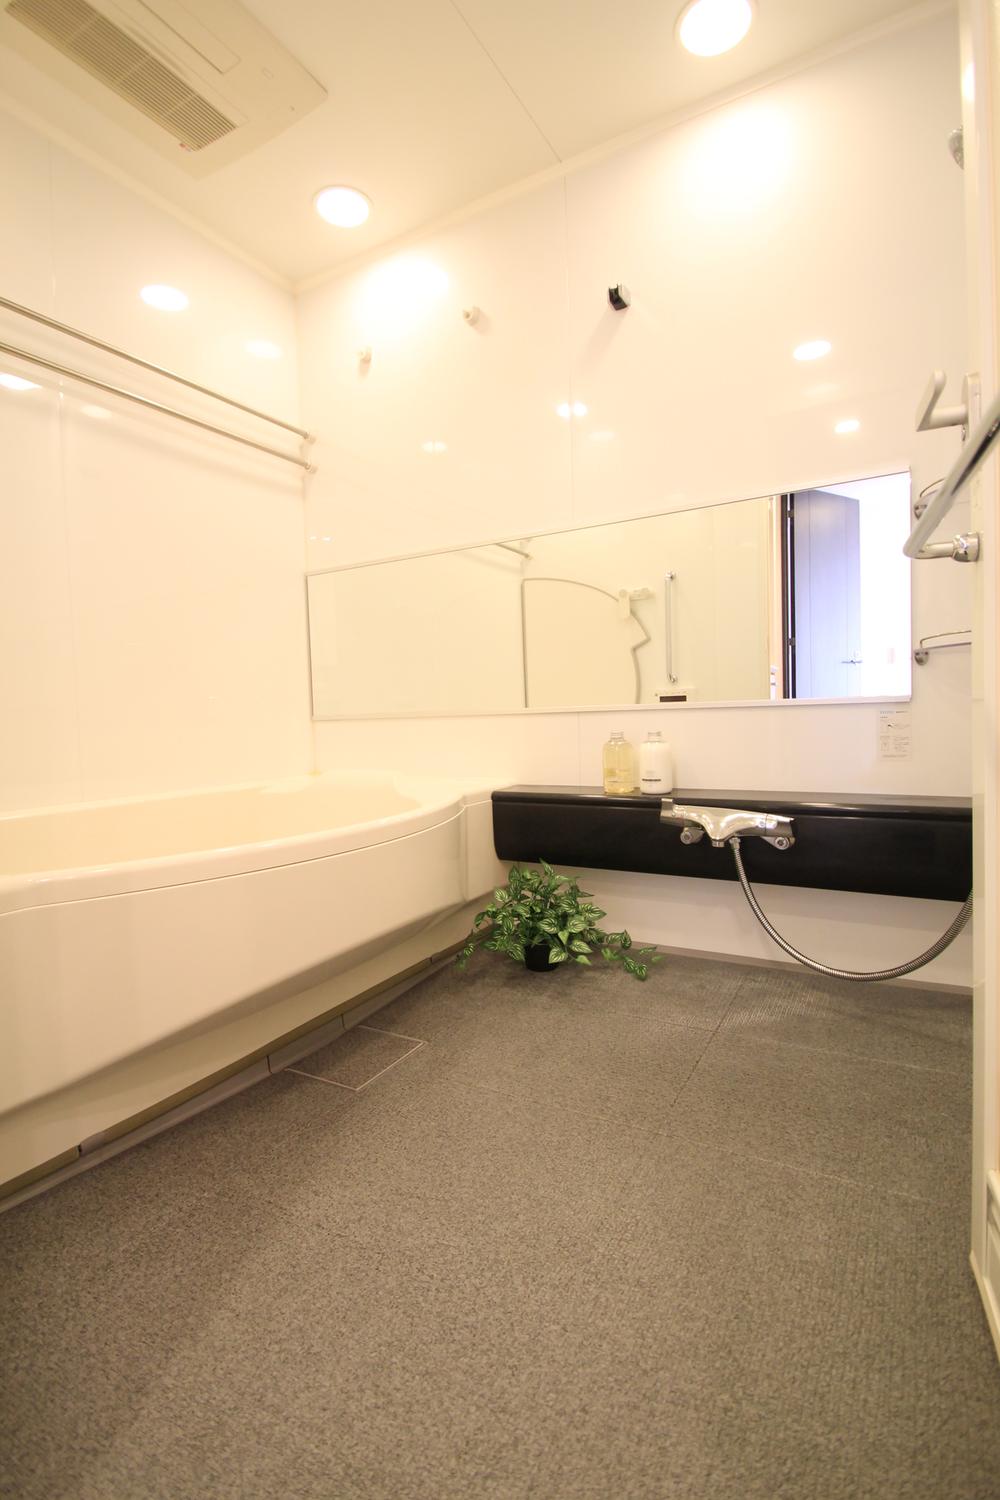 Bathroom. Low-floor type with reduced height of 1620 high-shell bathtub of spacious relaxing effect of size stride. Lighting in the bathroom adopts soft light pleasant downlight. Please enjoy the bus time of relaxation heal the fatigue of the day.